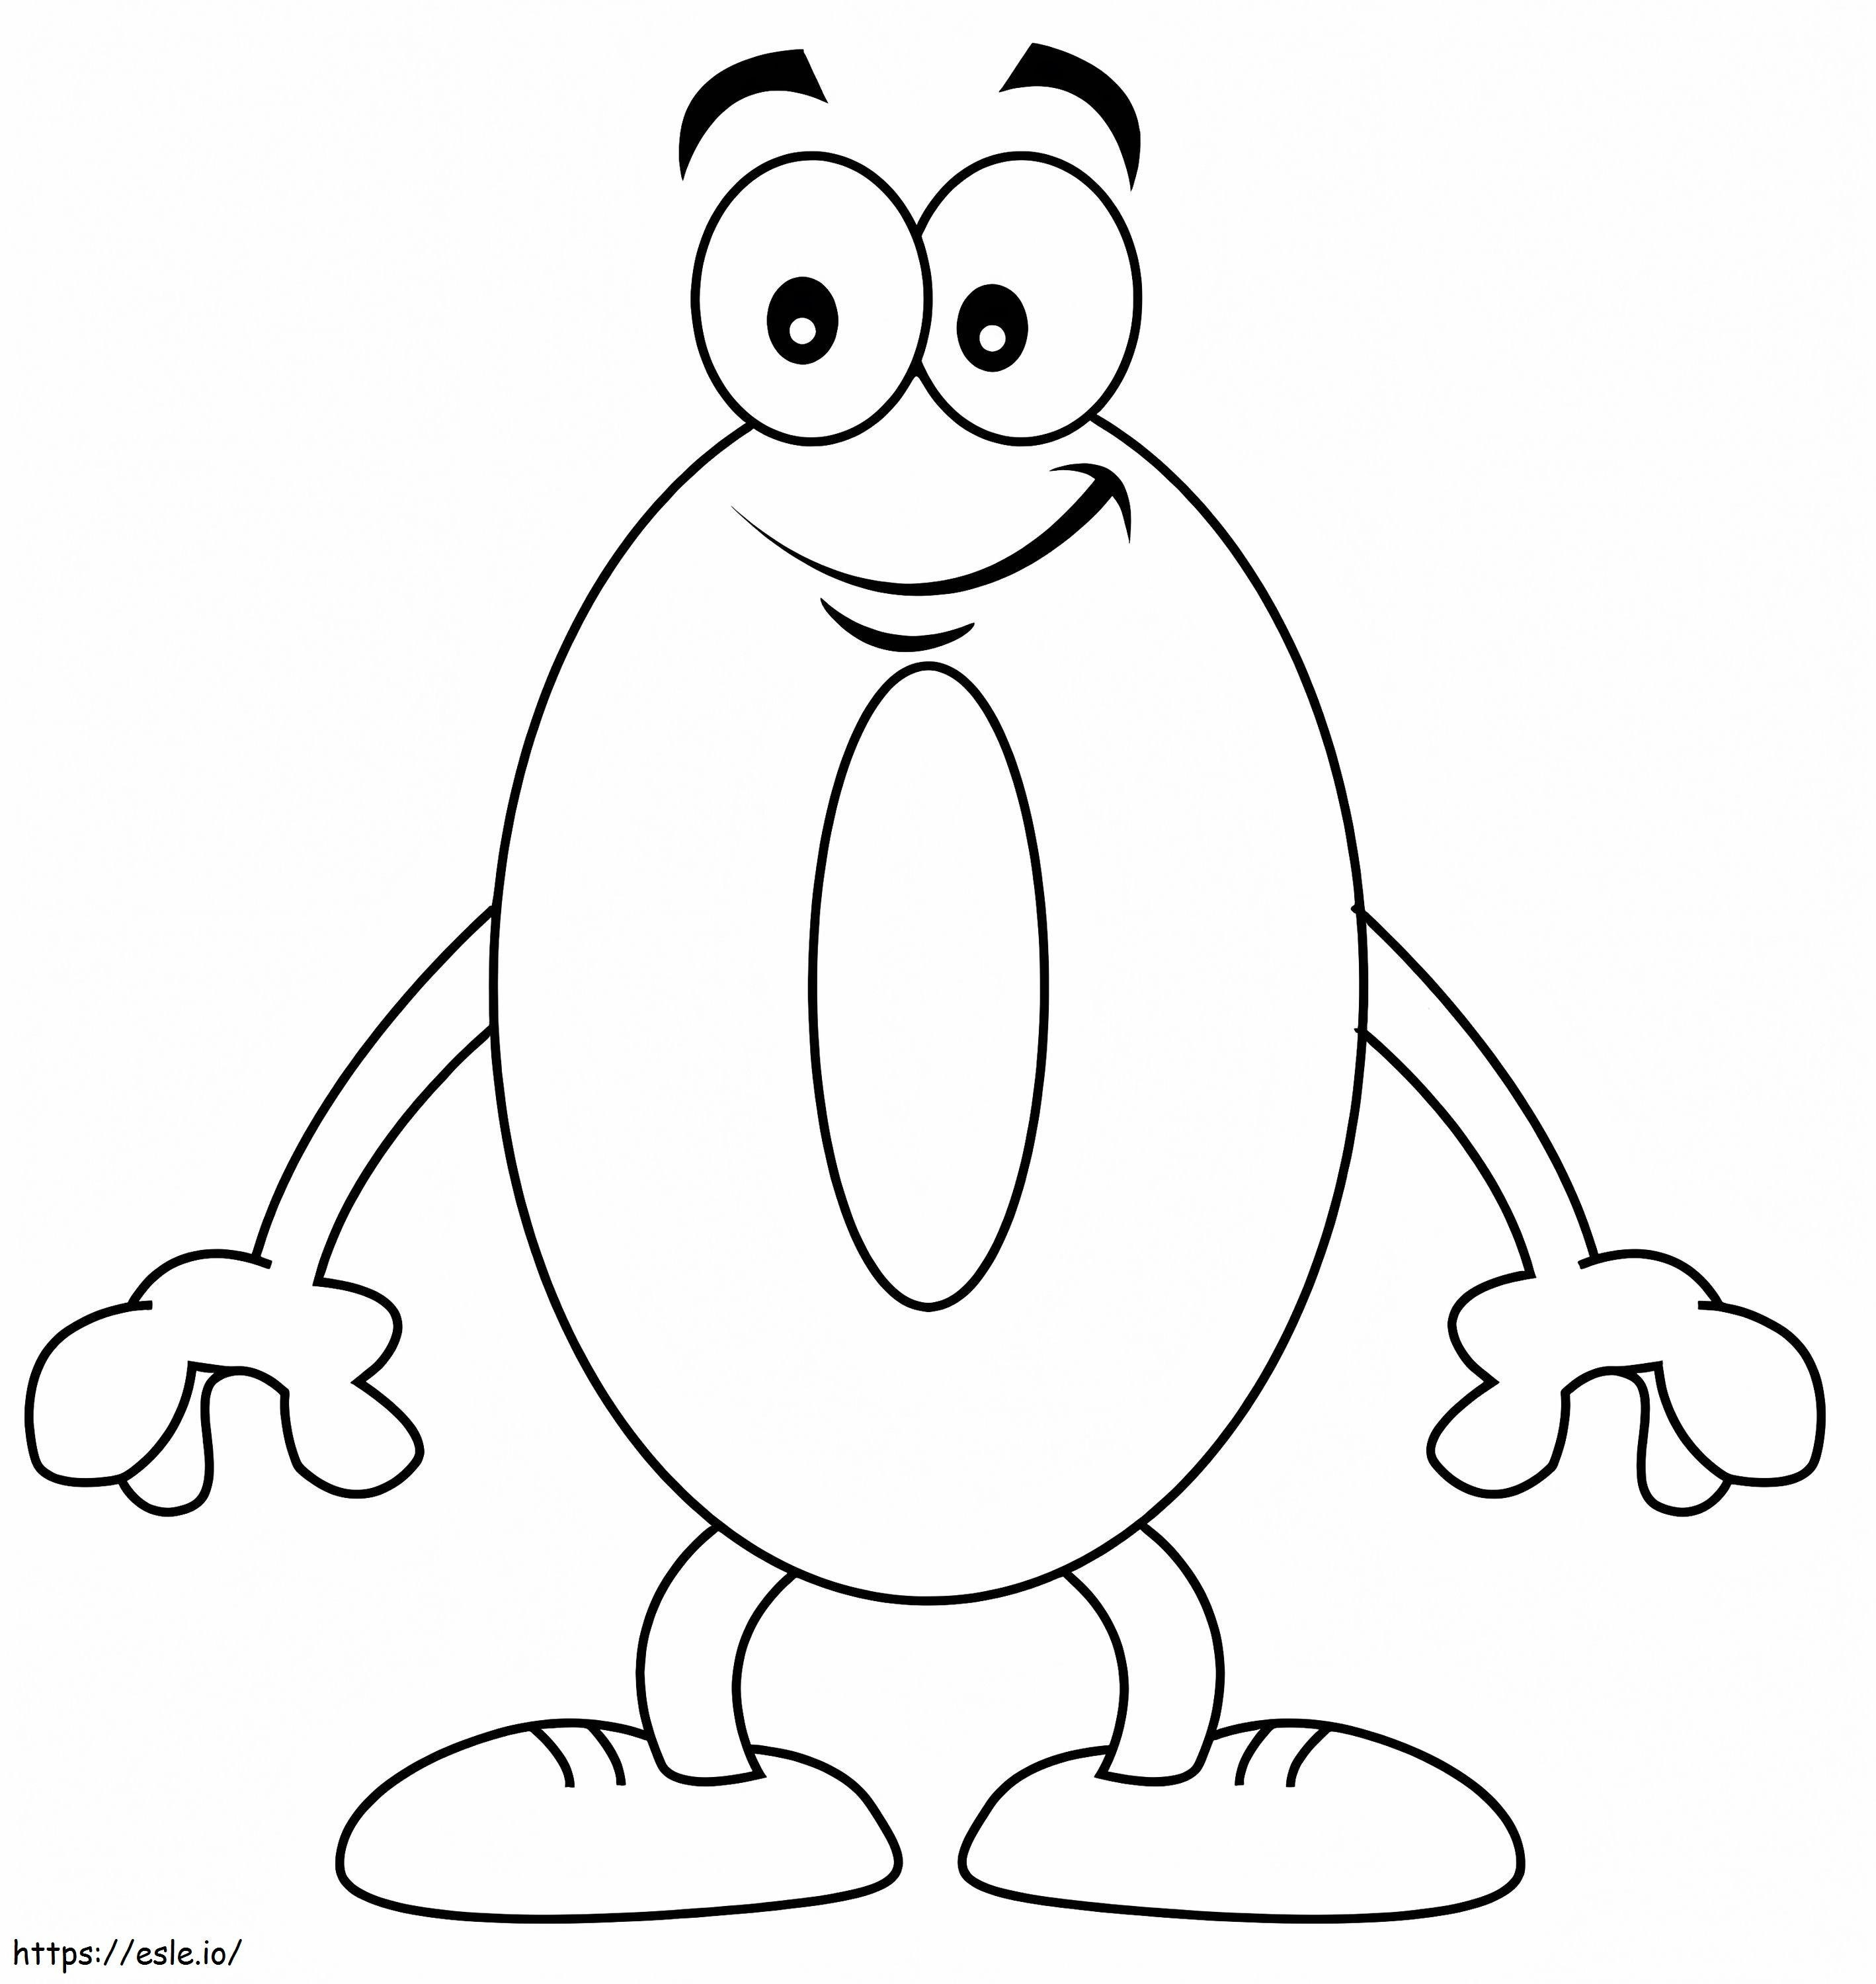 Happy Number 0 coloring page